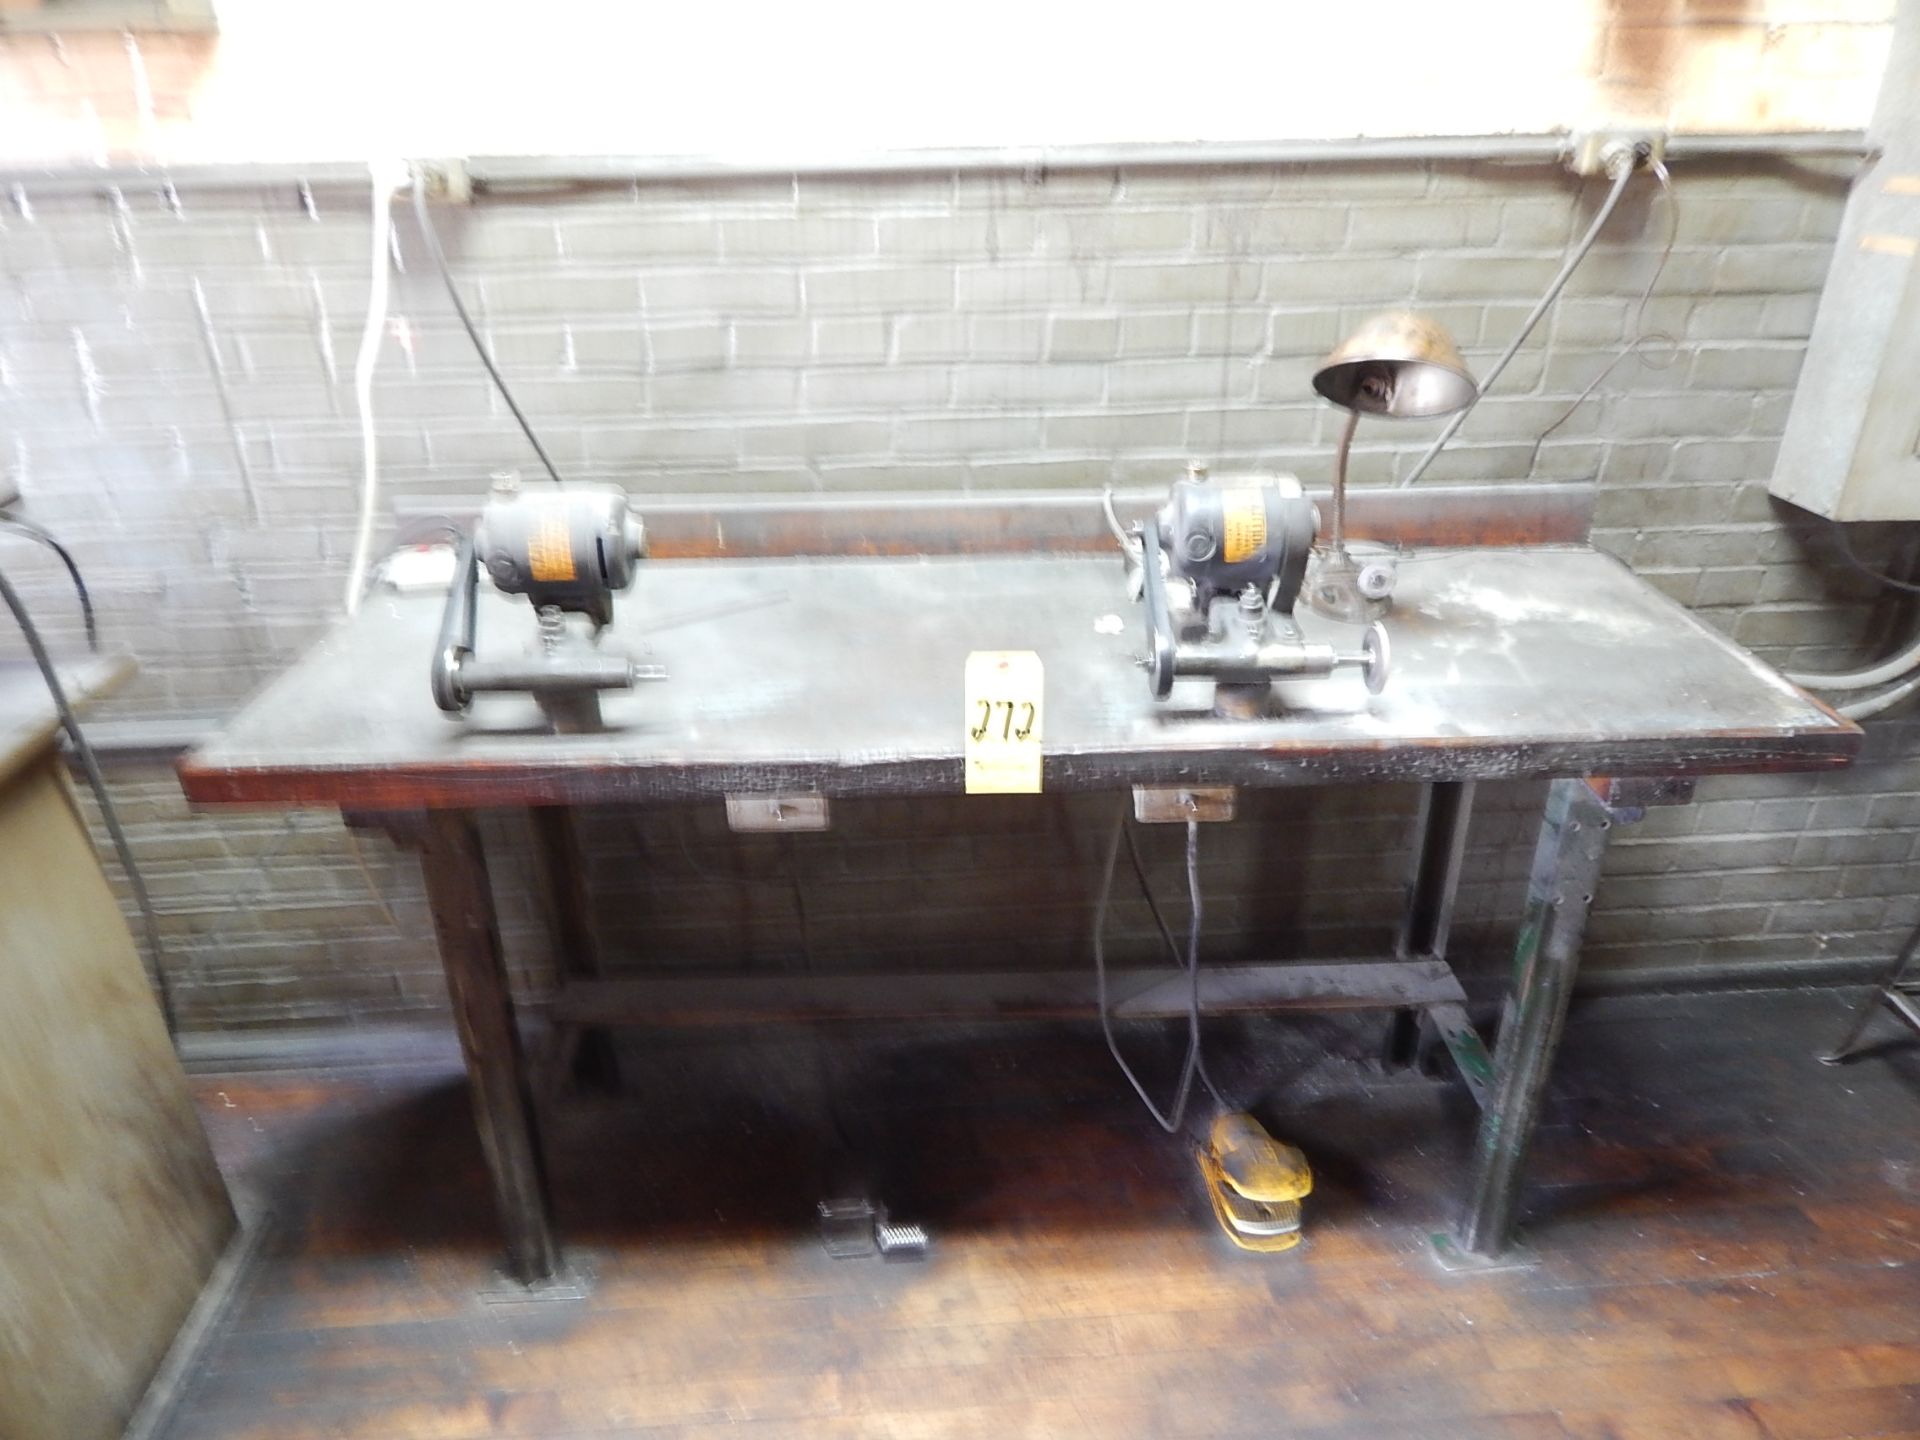 Work Bench with Grinders